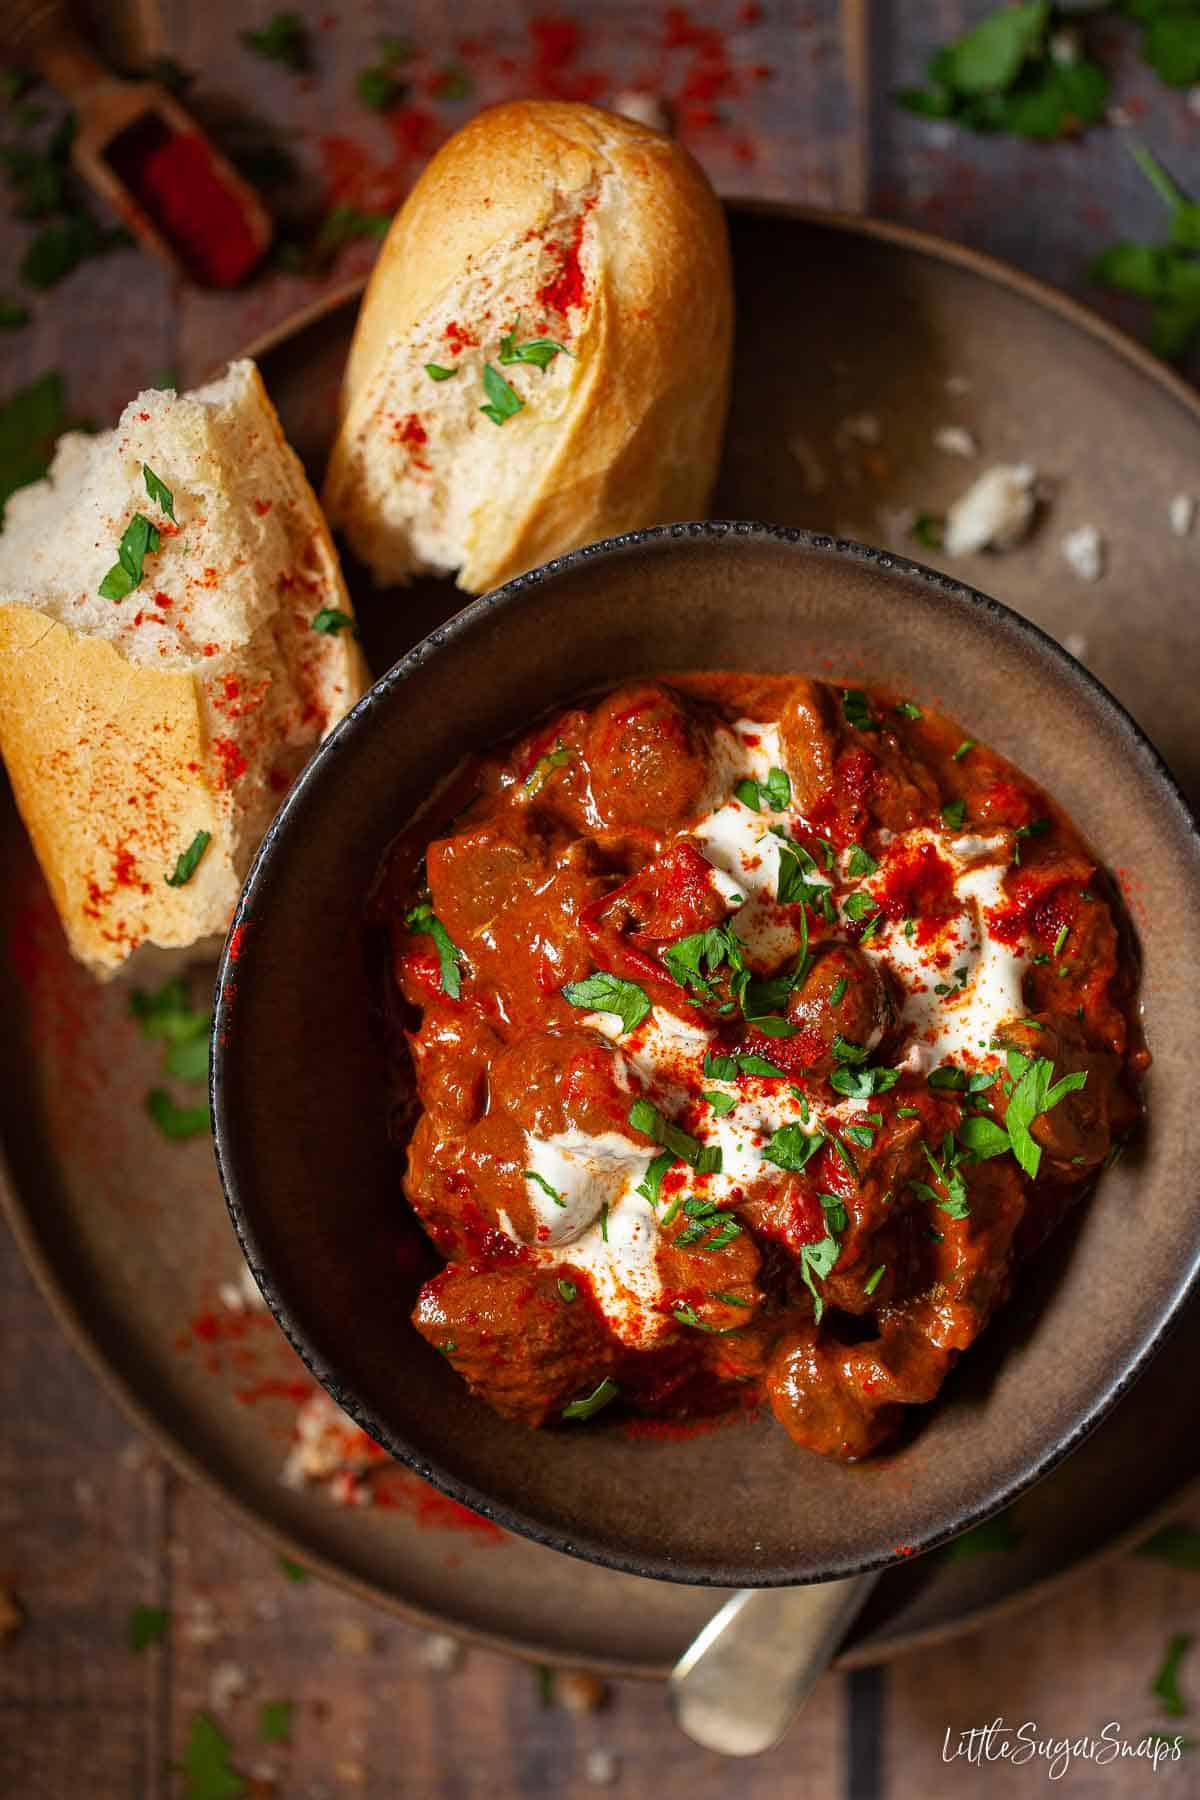 A bowl of slow-cooked goulash served with soured cream, parsley and crusty bread.